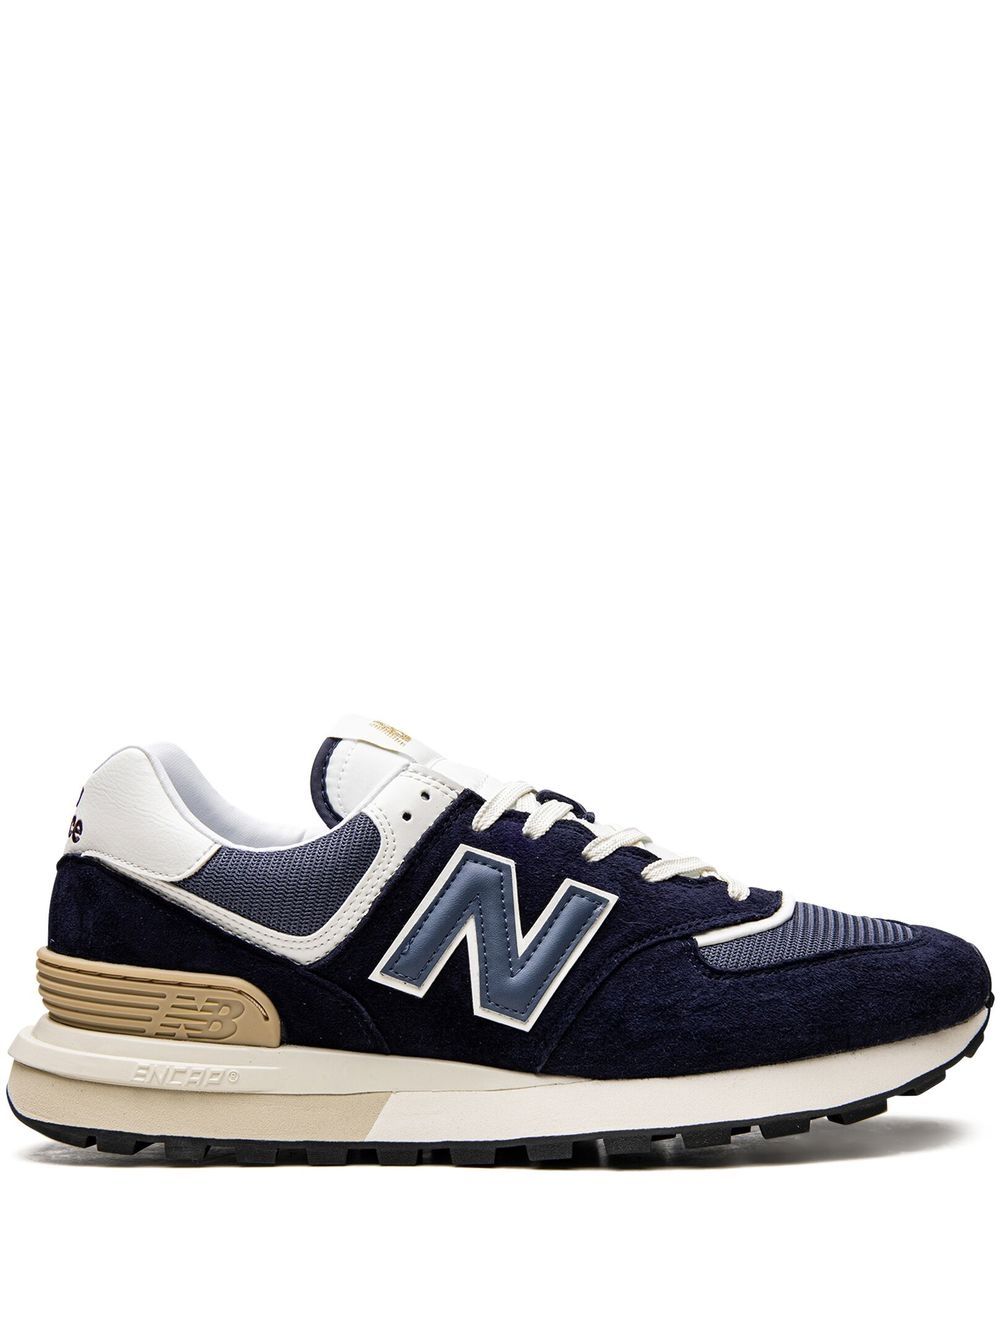 New Balance 574 low-top sneakers - Blue